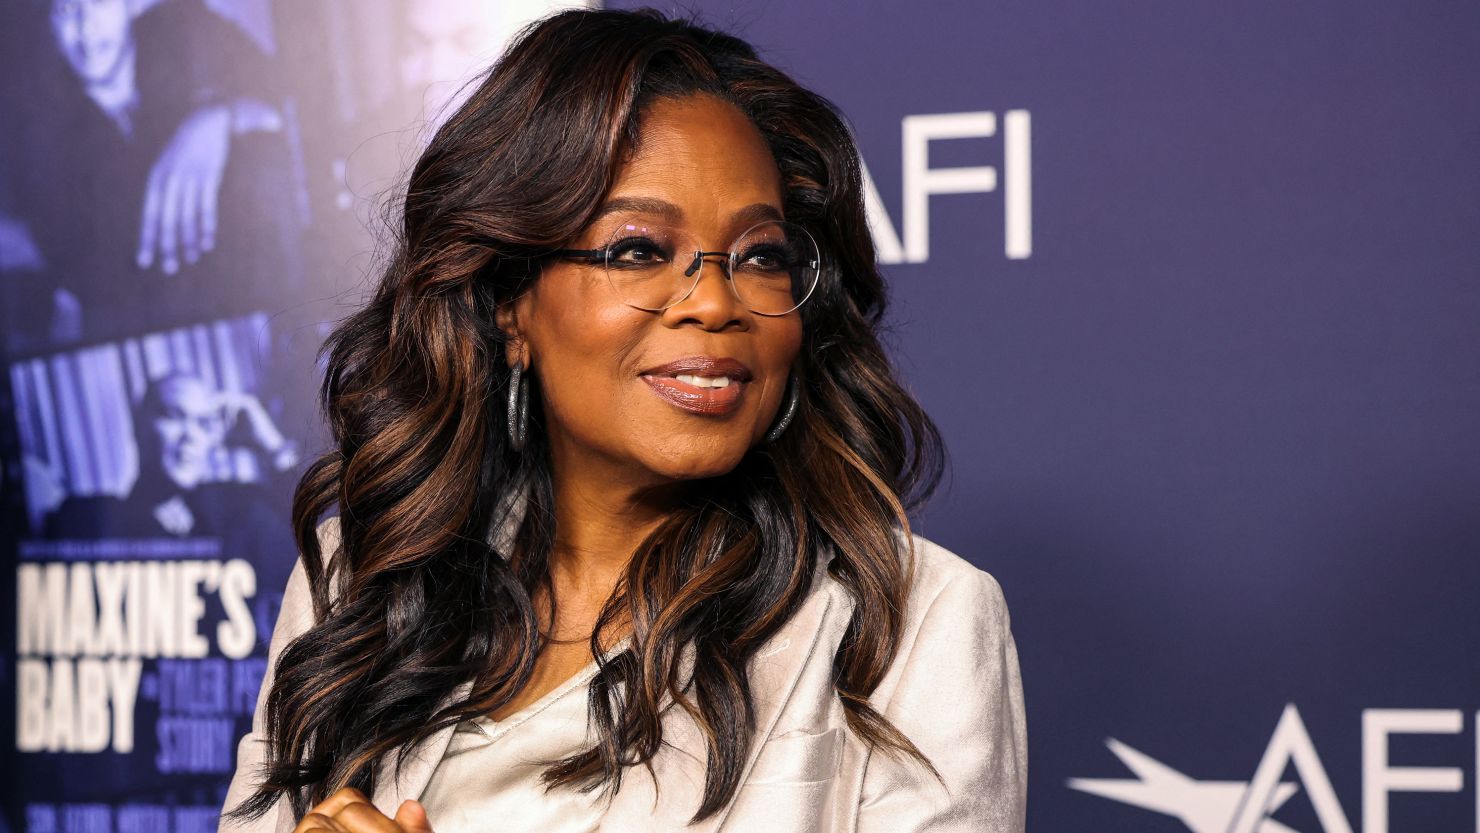 Oprah Winfrey surprises young fan who reenacted 'The Color Purple